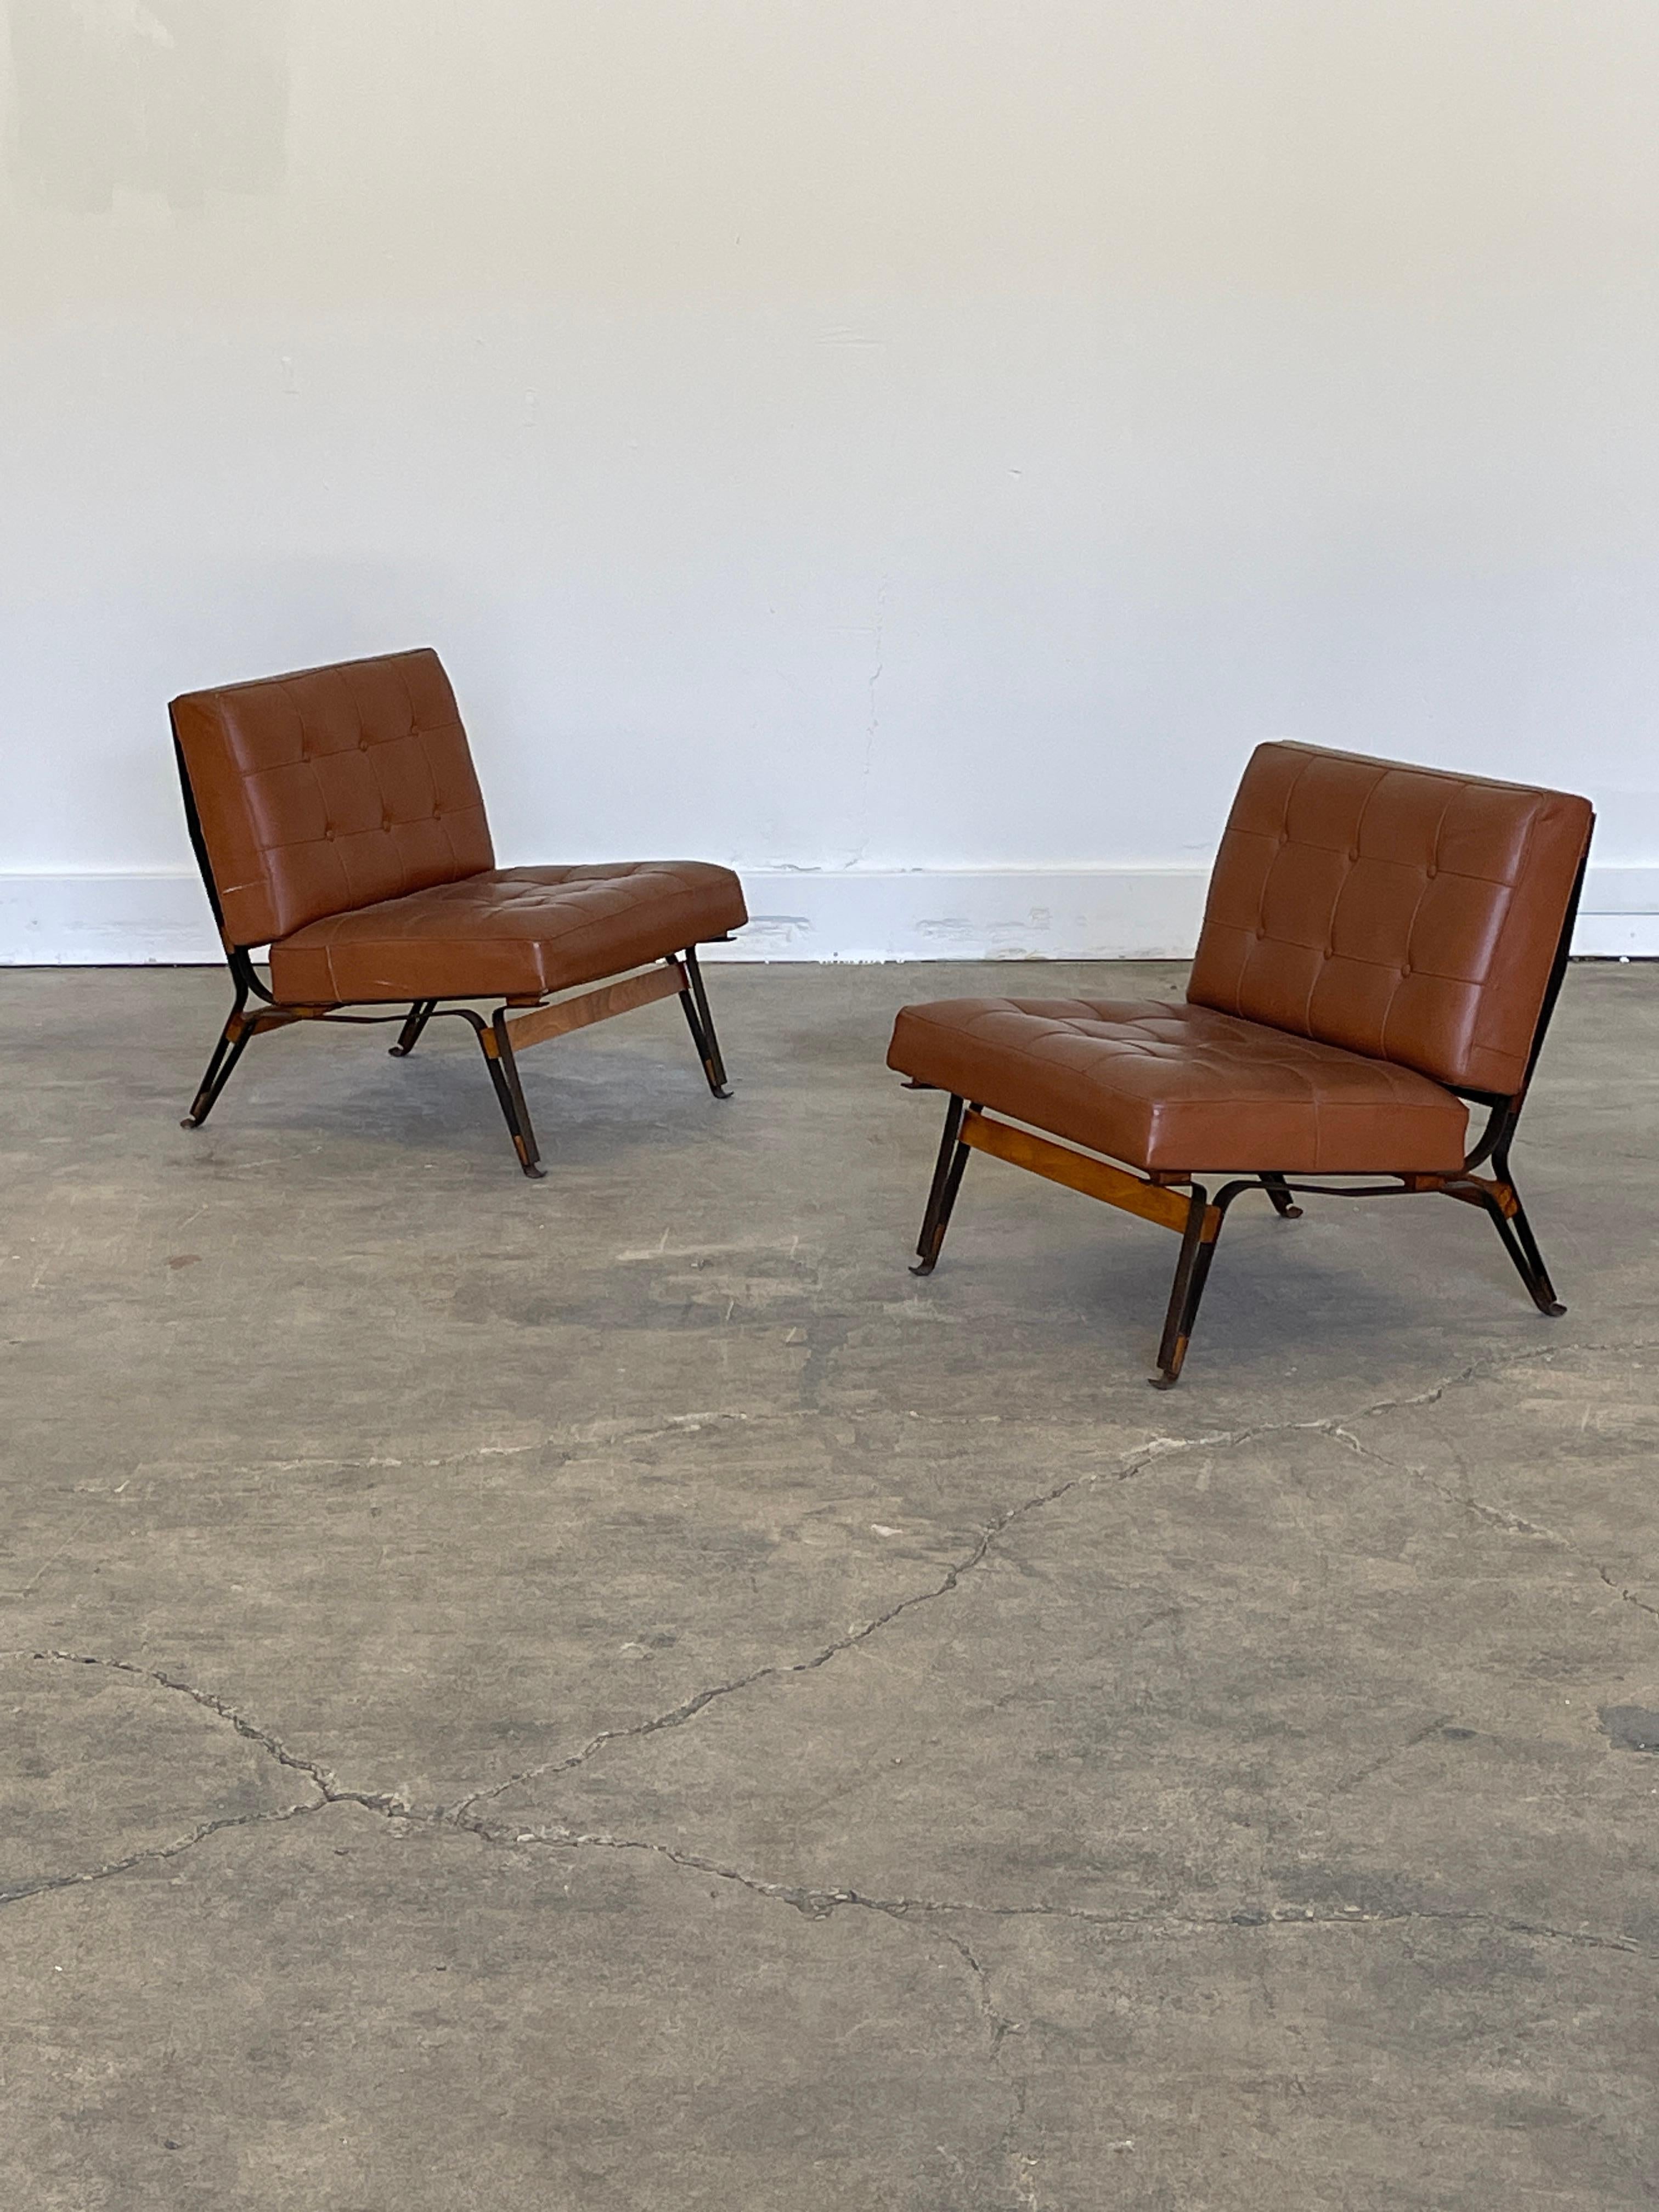 Italian Model 856 Rare Pair of Matched Leather Lounge Chairs by Ico Parisi, 1950s For Sale